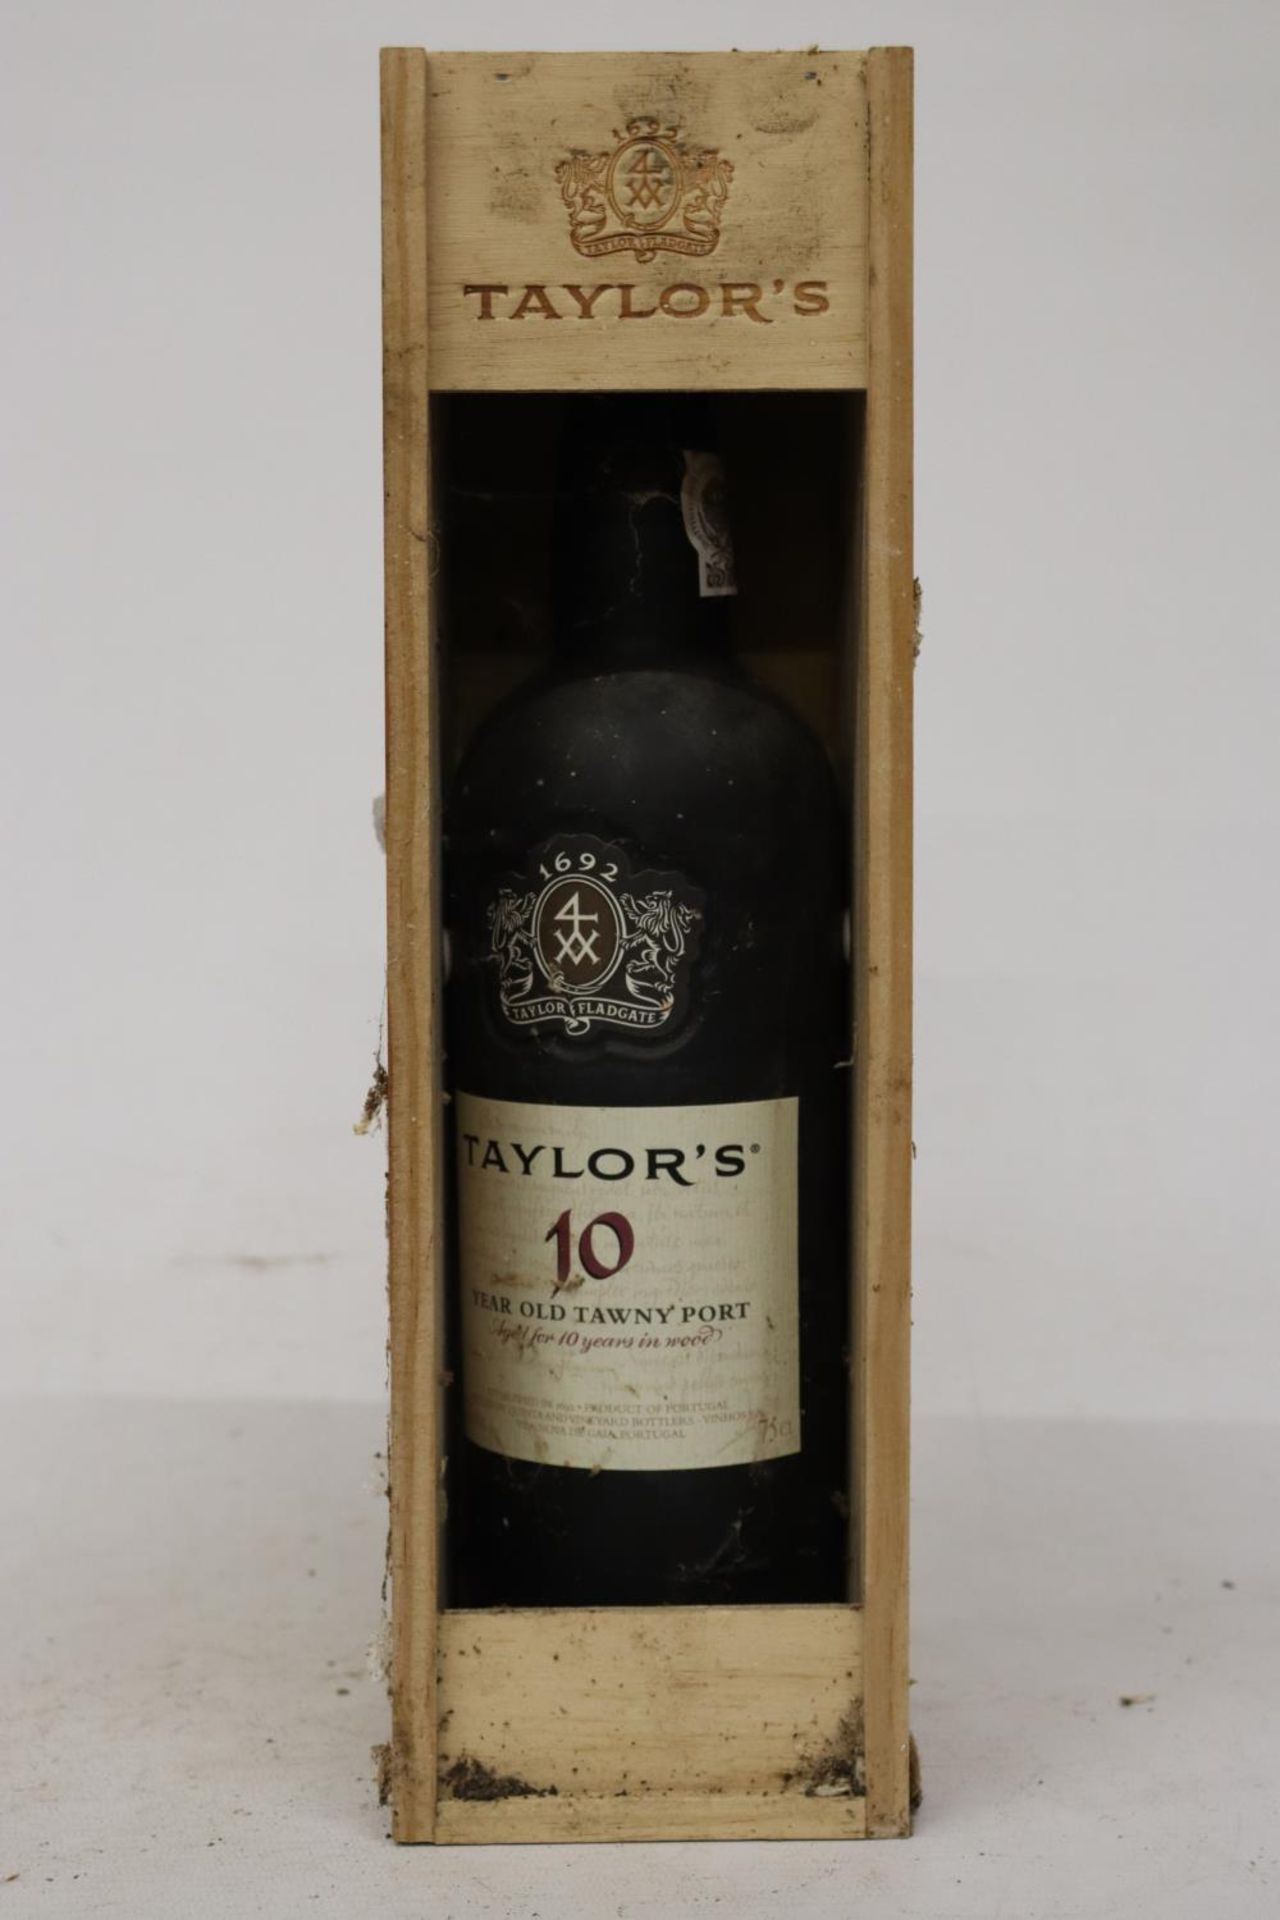 A BOTTLE OF TAYLOR'S 10 YEAR TAWNEY PORT IN WOODEN PRESENTATION BOX